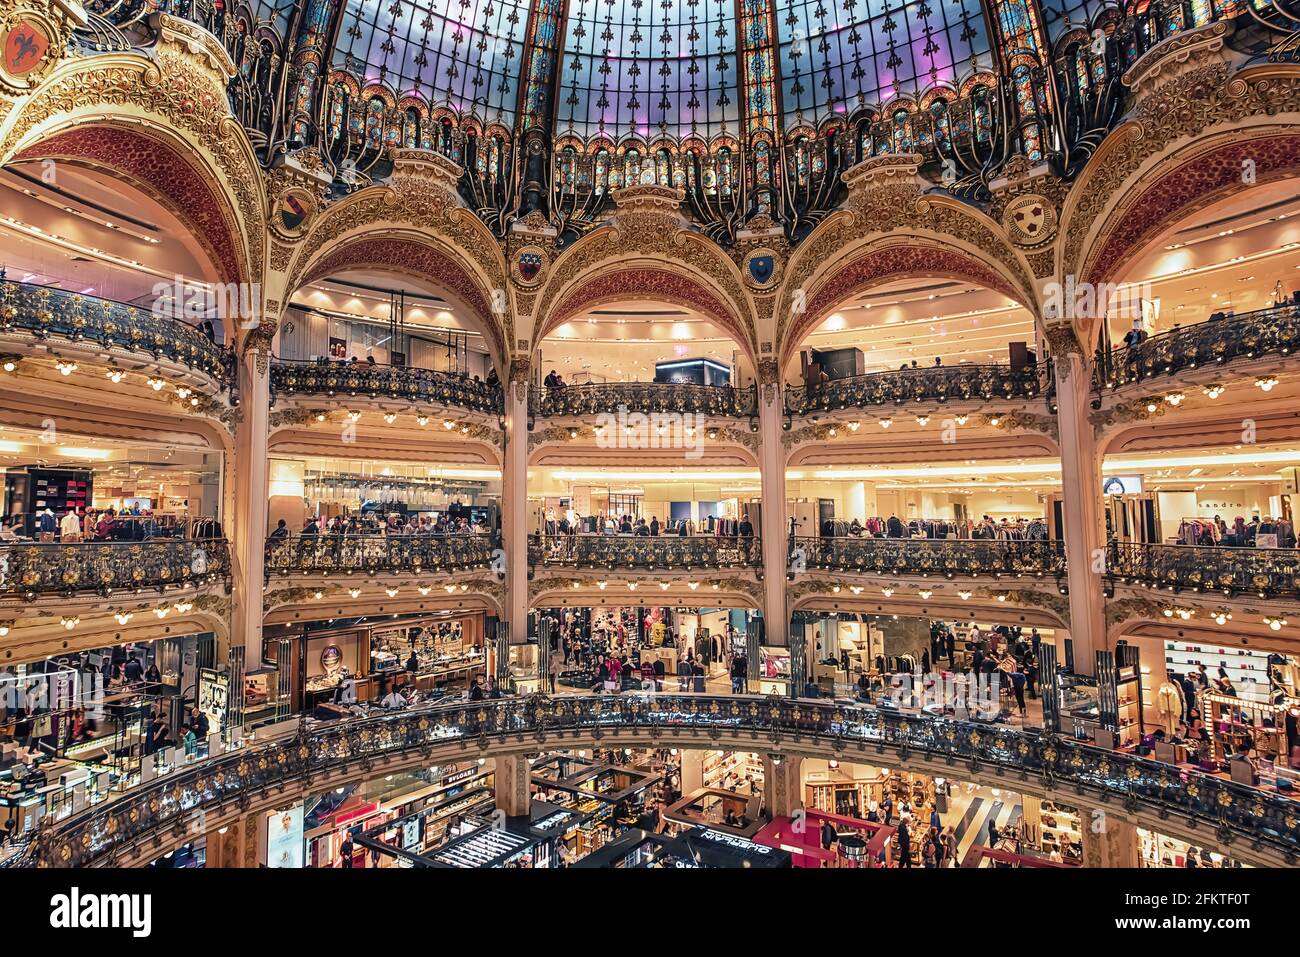 Galeries Lafayette shopping mall in Paris Stock Photo - Alamy